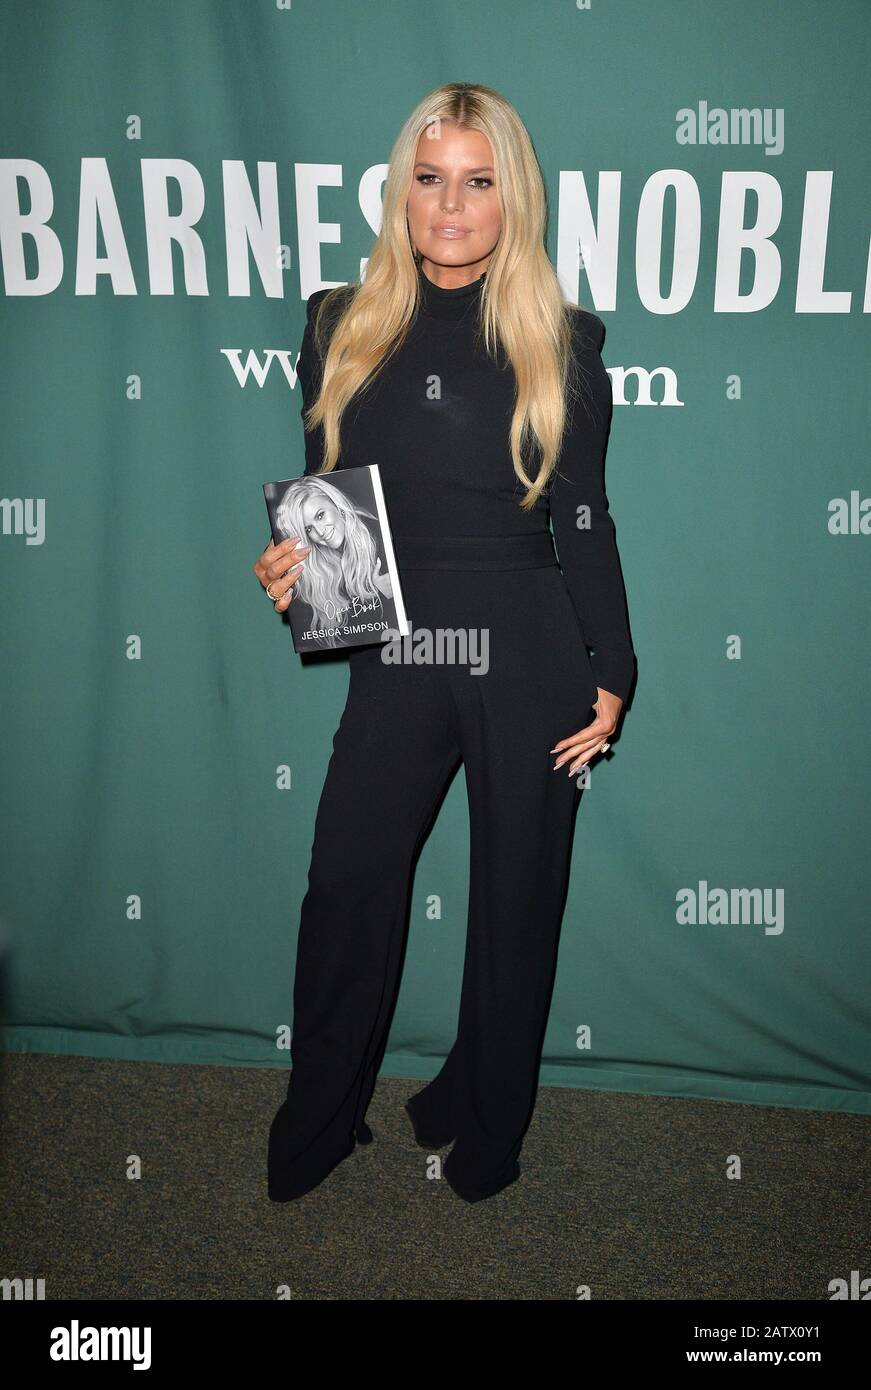 New York, NY, USA. 4th Feb, 2020. Jessica Simpson at in-store appearance for Jessica Simpson 'Open Book' Booksigning, Barnes & Noble Union Square, New York, NY February 4, 2020. Credit: Kristin Callahan/Everett Collection/Alamy Live News Stock Photo